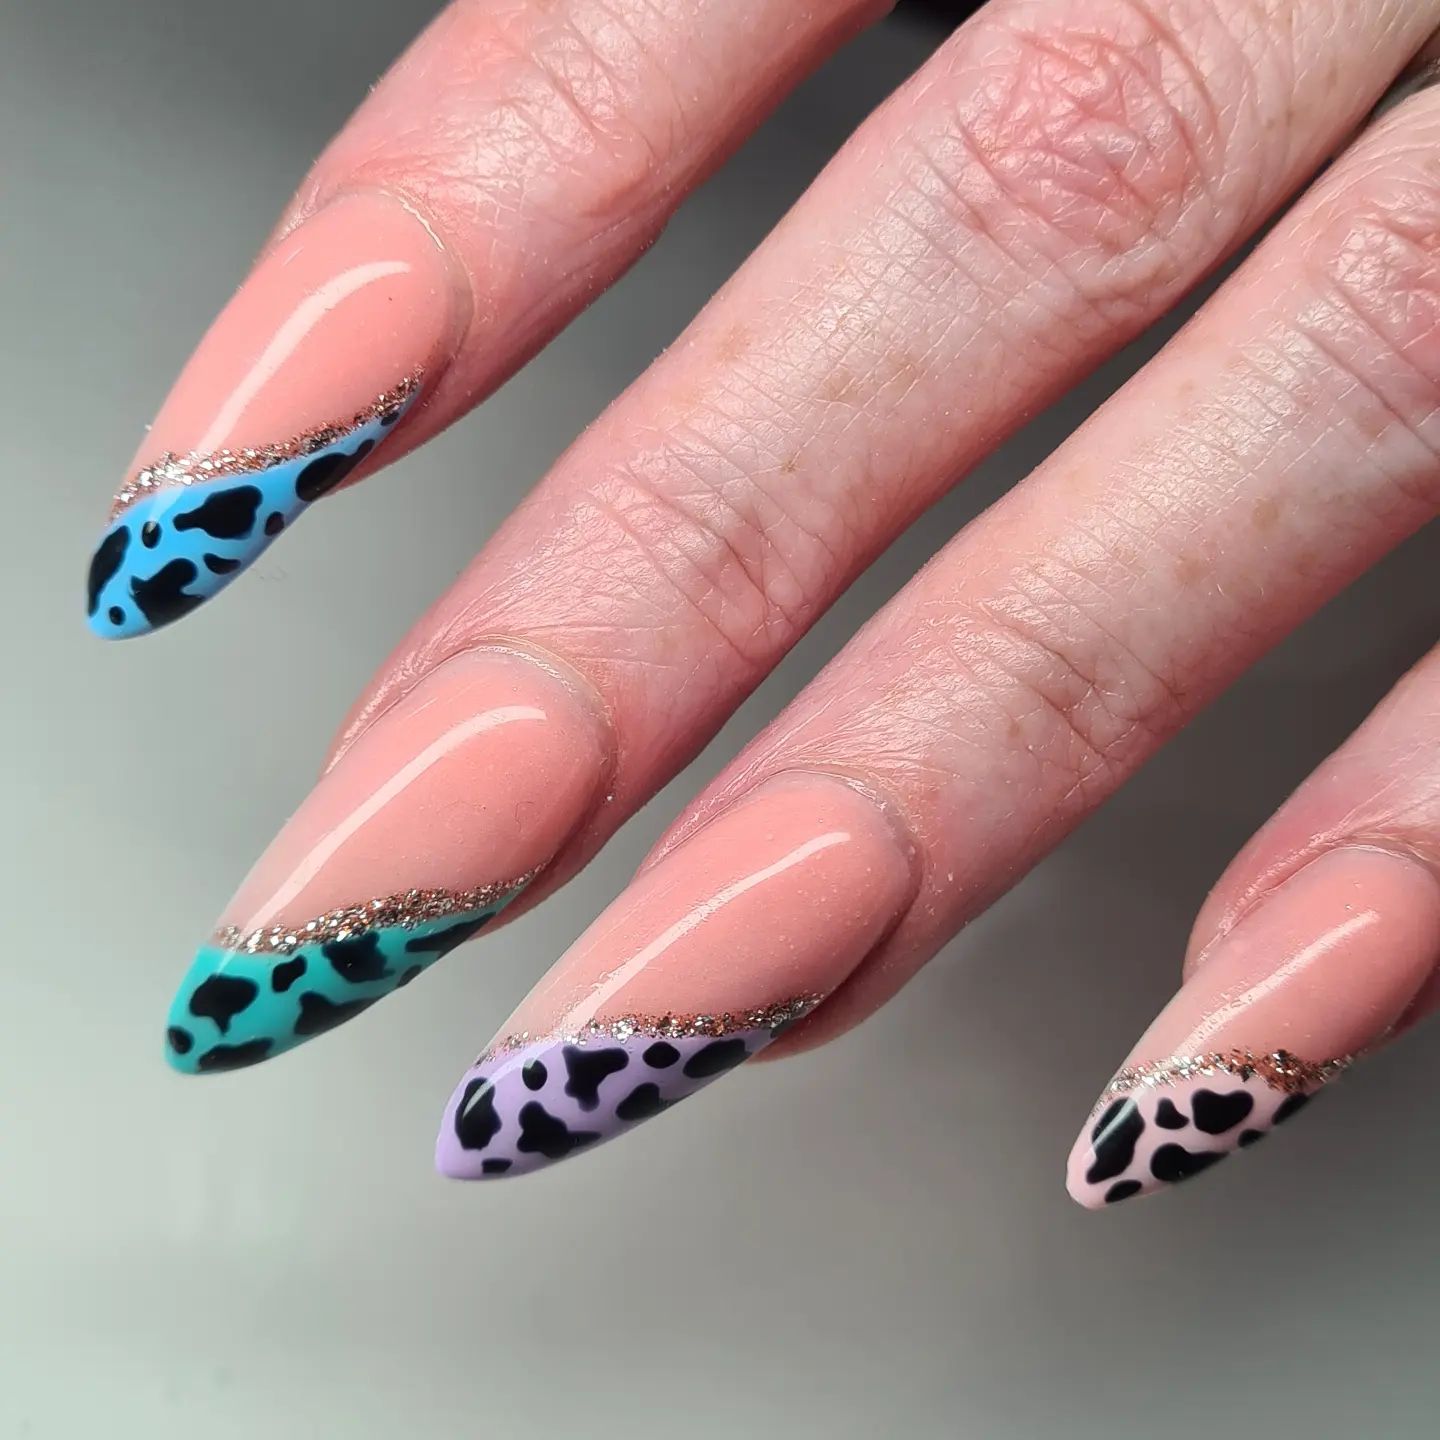 Covering all of your nails with cow prints may sound boring to you, so we have a great example to try. First, apply nude nail polish and add a swirl to each of your nails. The other part of the swirls will be covered with colorful cow prints and you will look amazing with them!